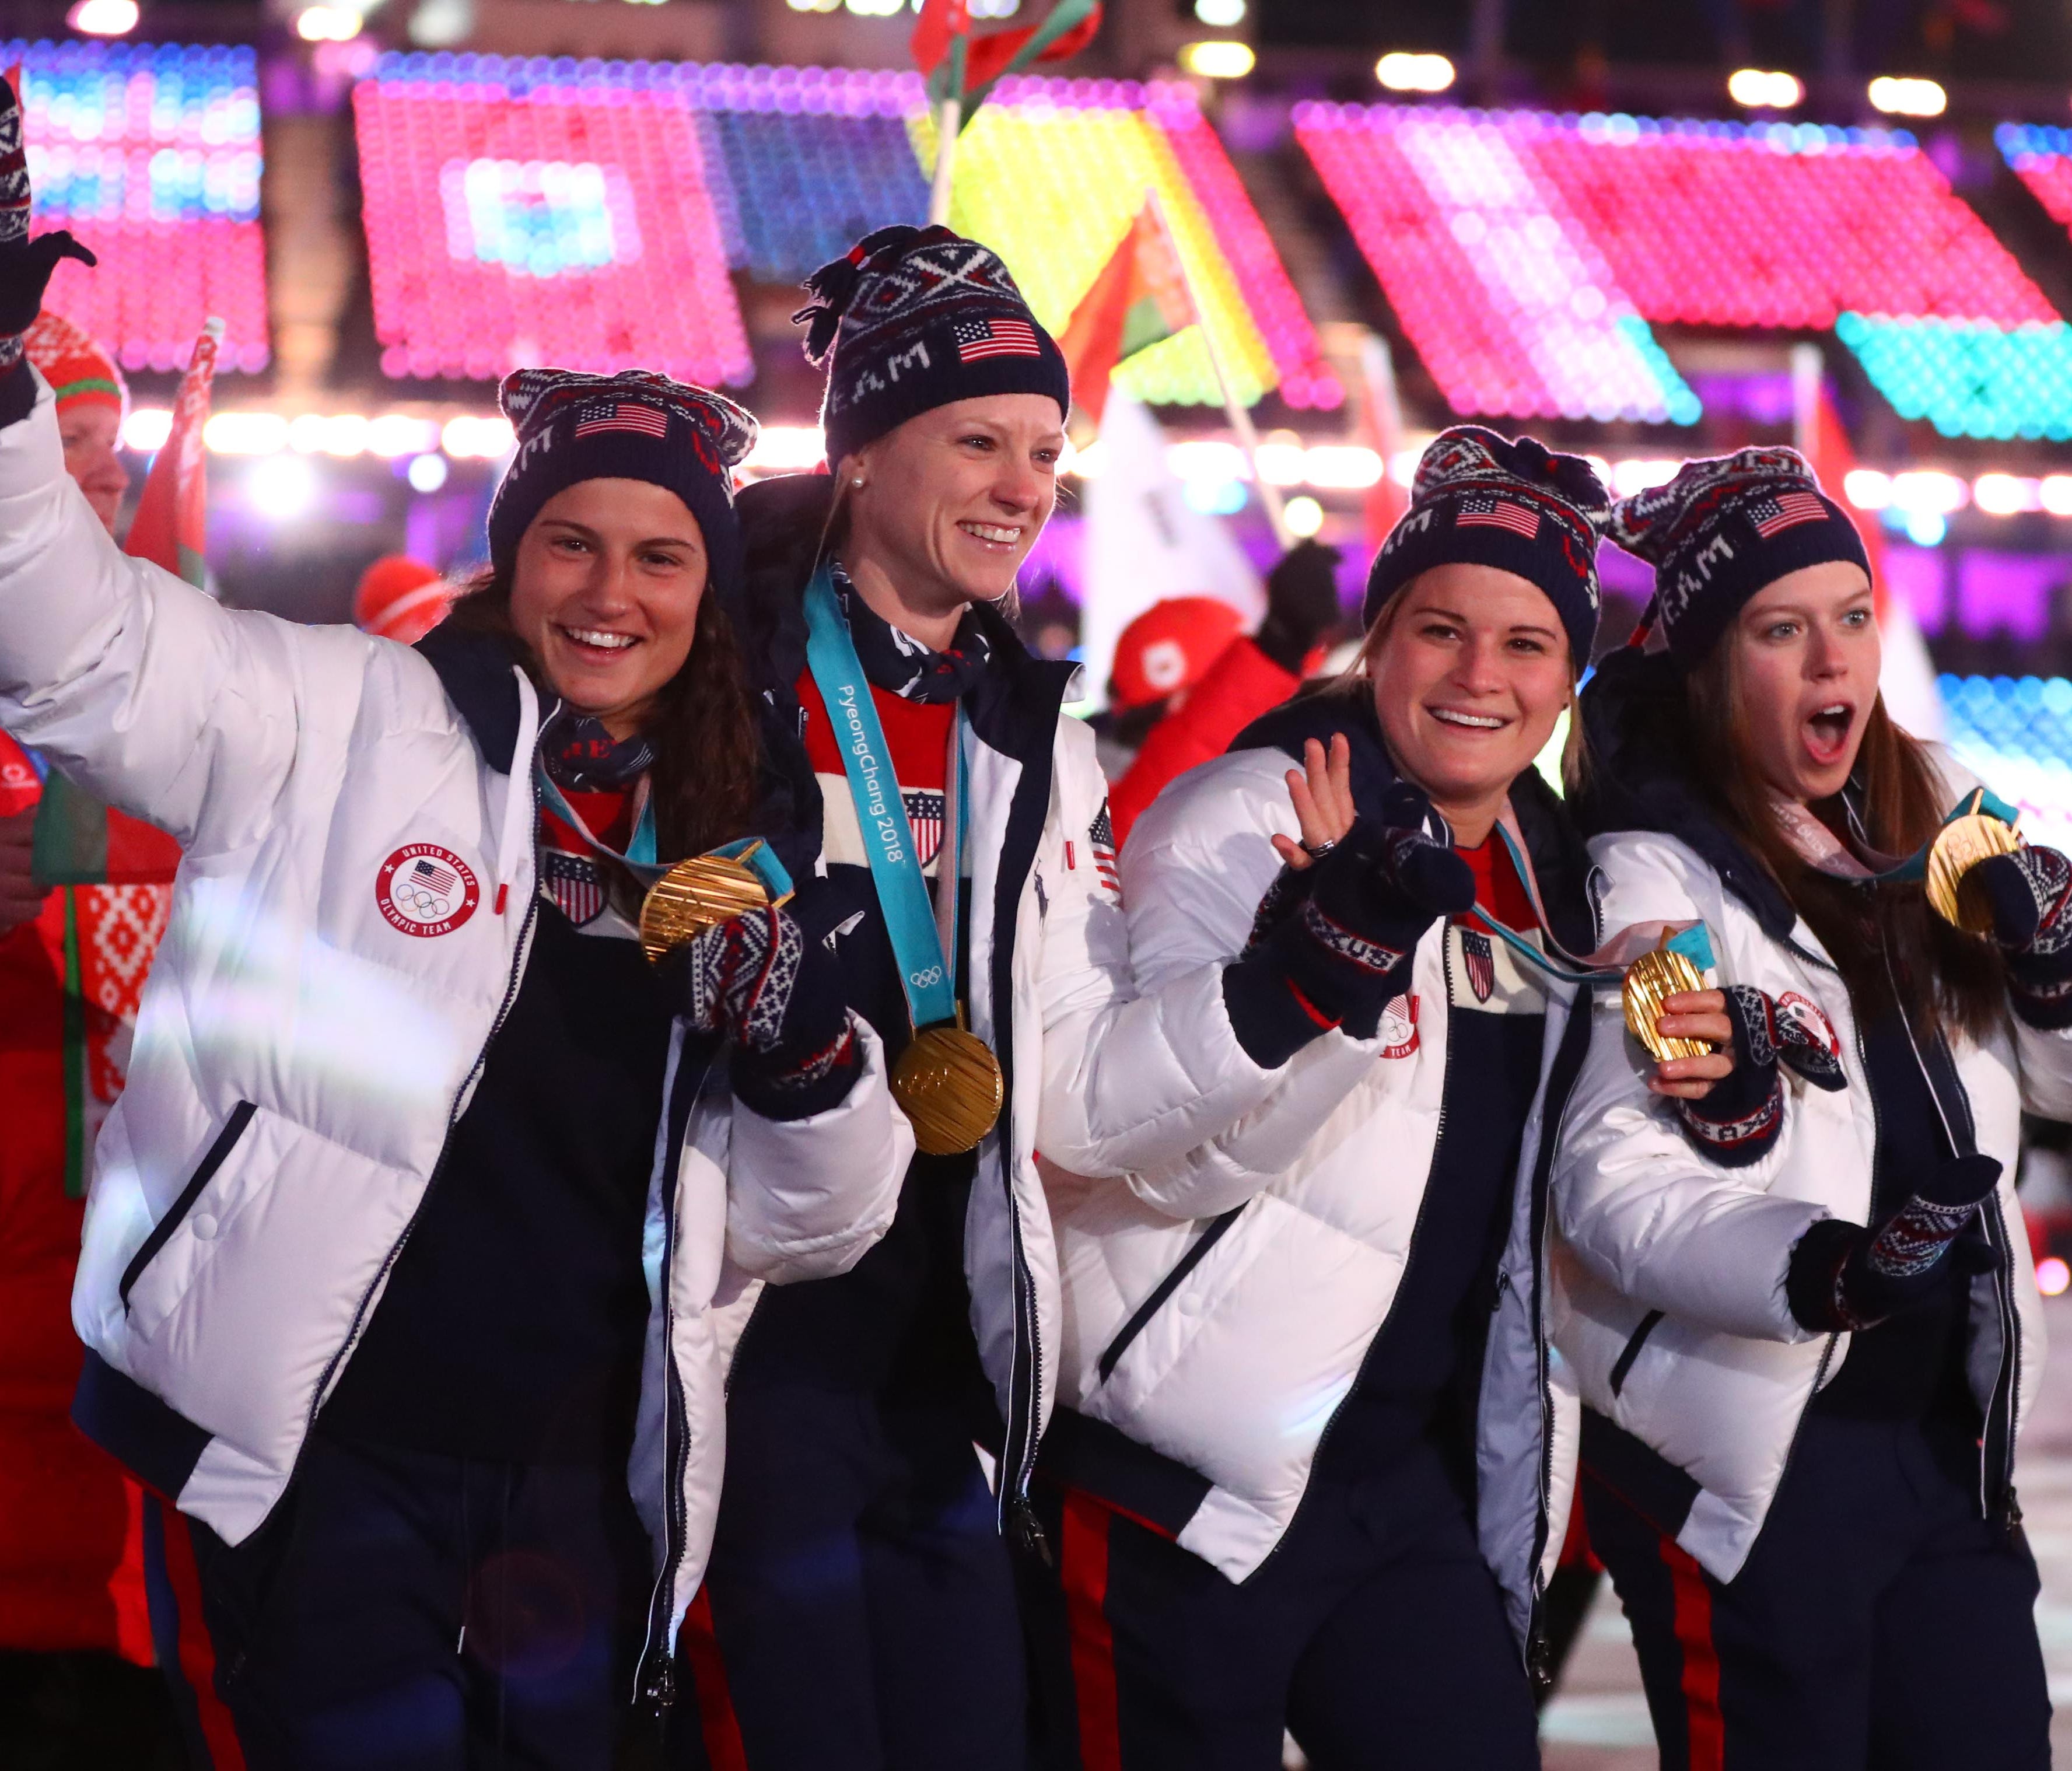 Feb 25, 2018; PyeongChang, South Korea; United States athletes with their medals during the closing ceremony for the Pyeongchang 2018 Olympic Winter Games at Pyeongchang Olympic Stadium. Mandatory Credit: Rob Schumacher-USA TODAY Sports